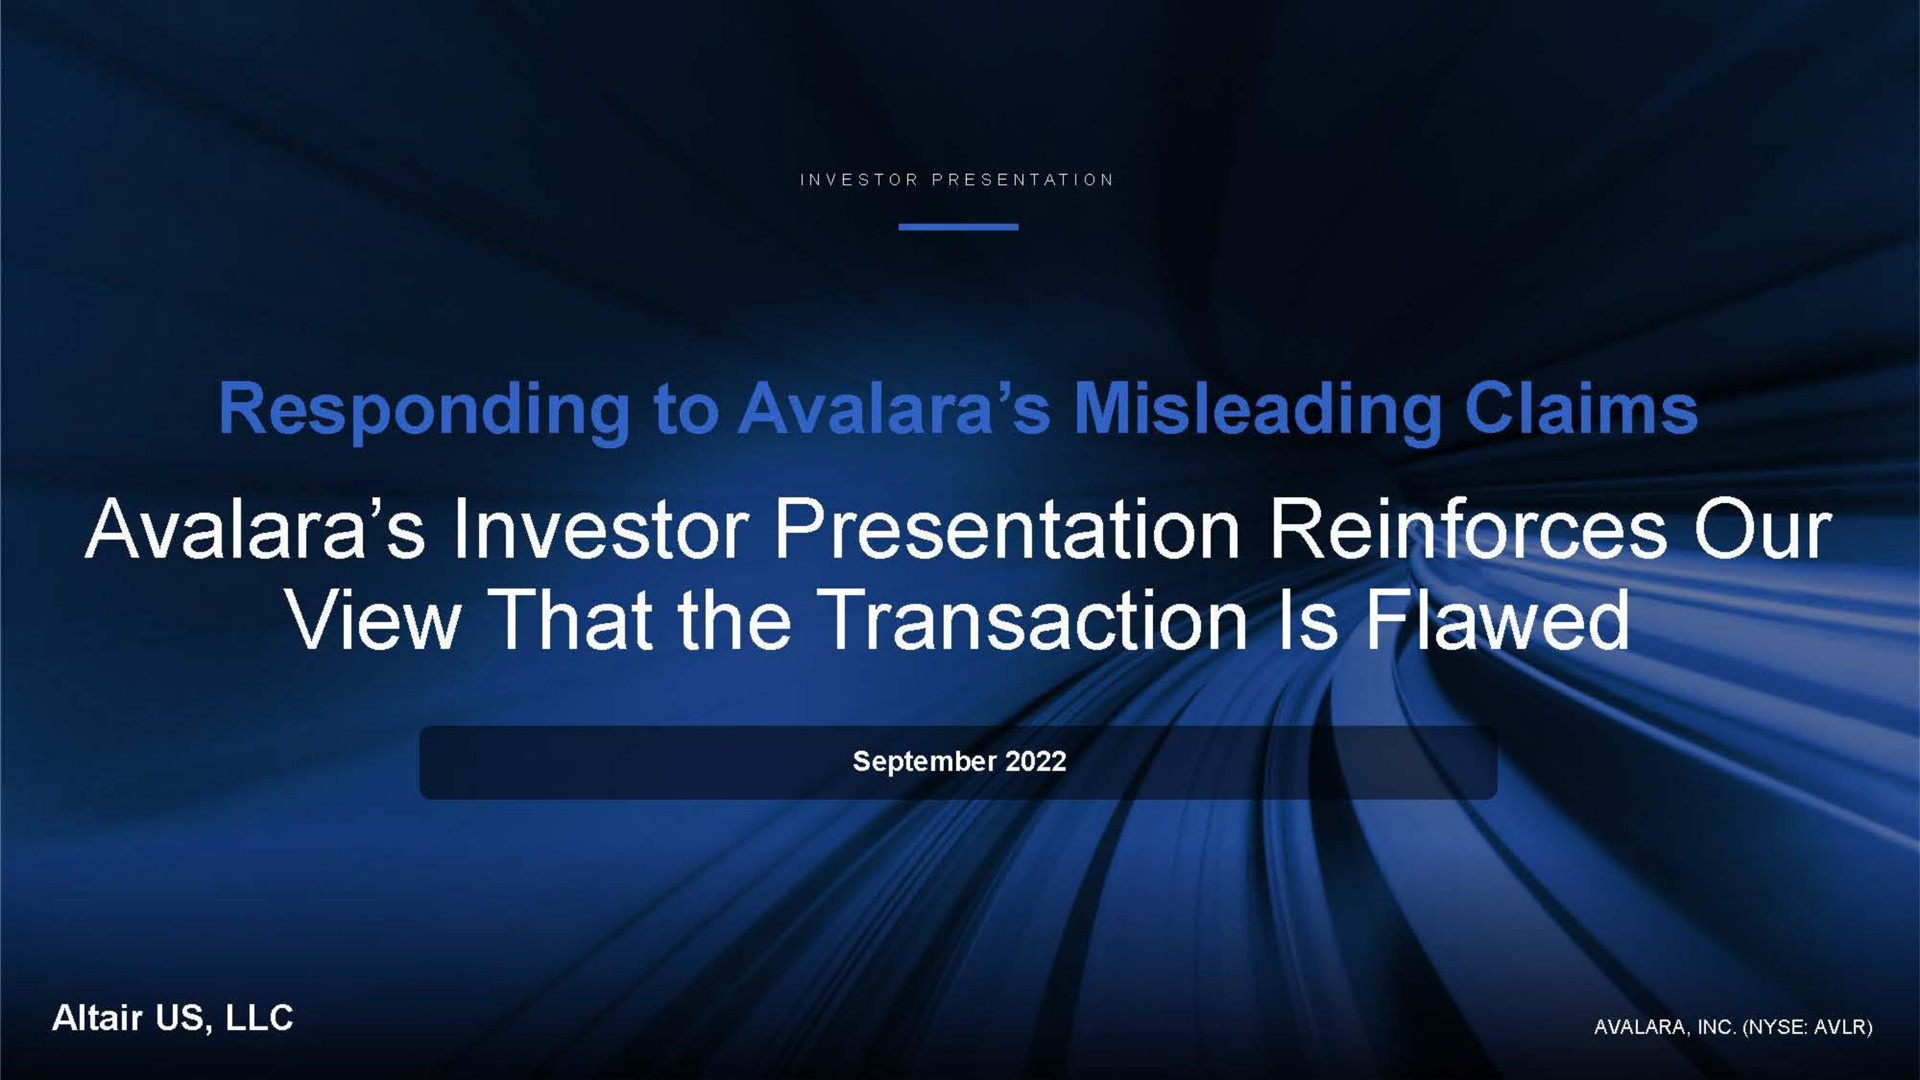 investor presentation reinforces our view that the transaction is flawed | Altair US LLC